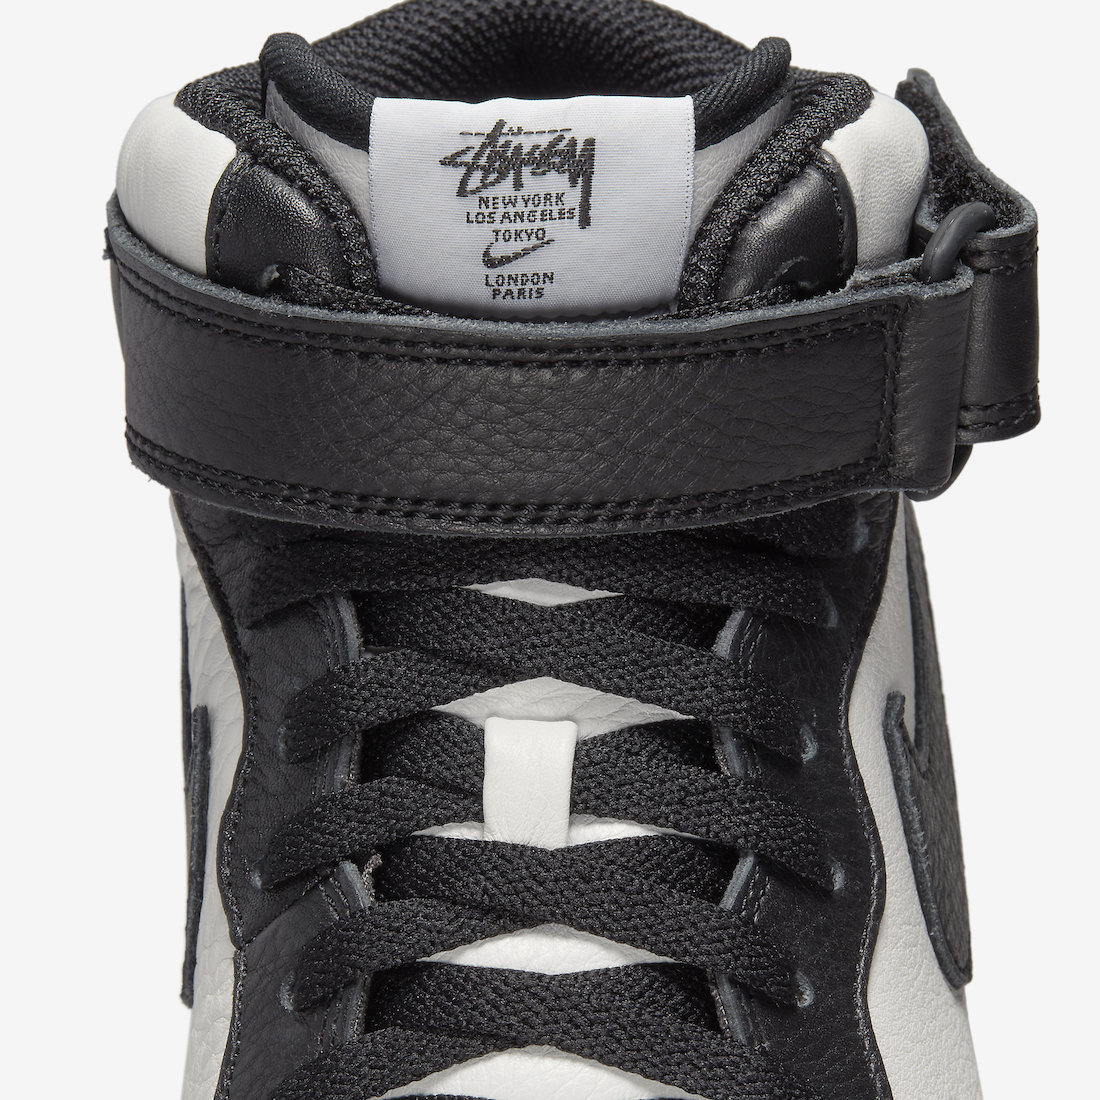 Stussy Nike Air Force 1 Mid DJ7840-002 Release Date